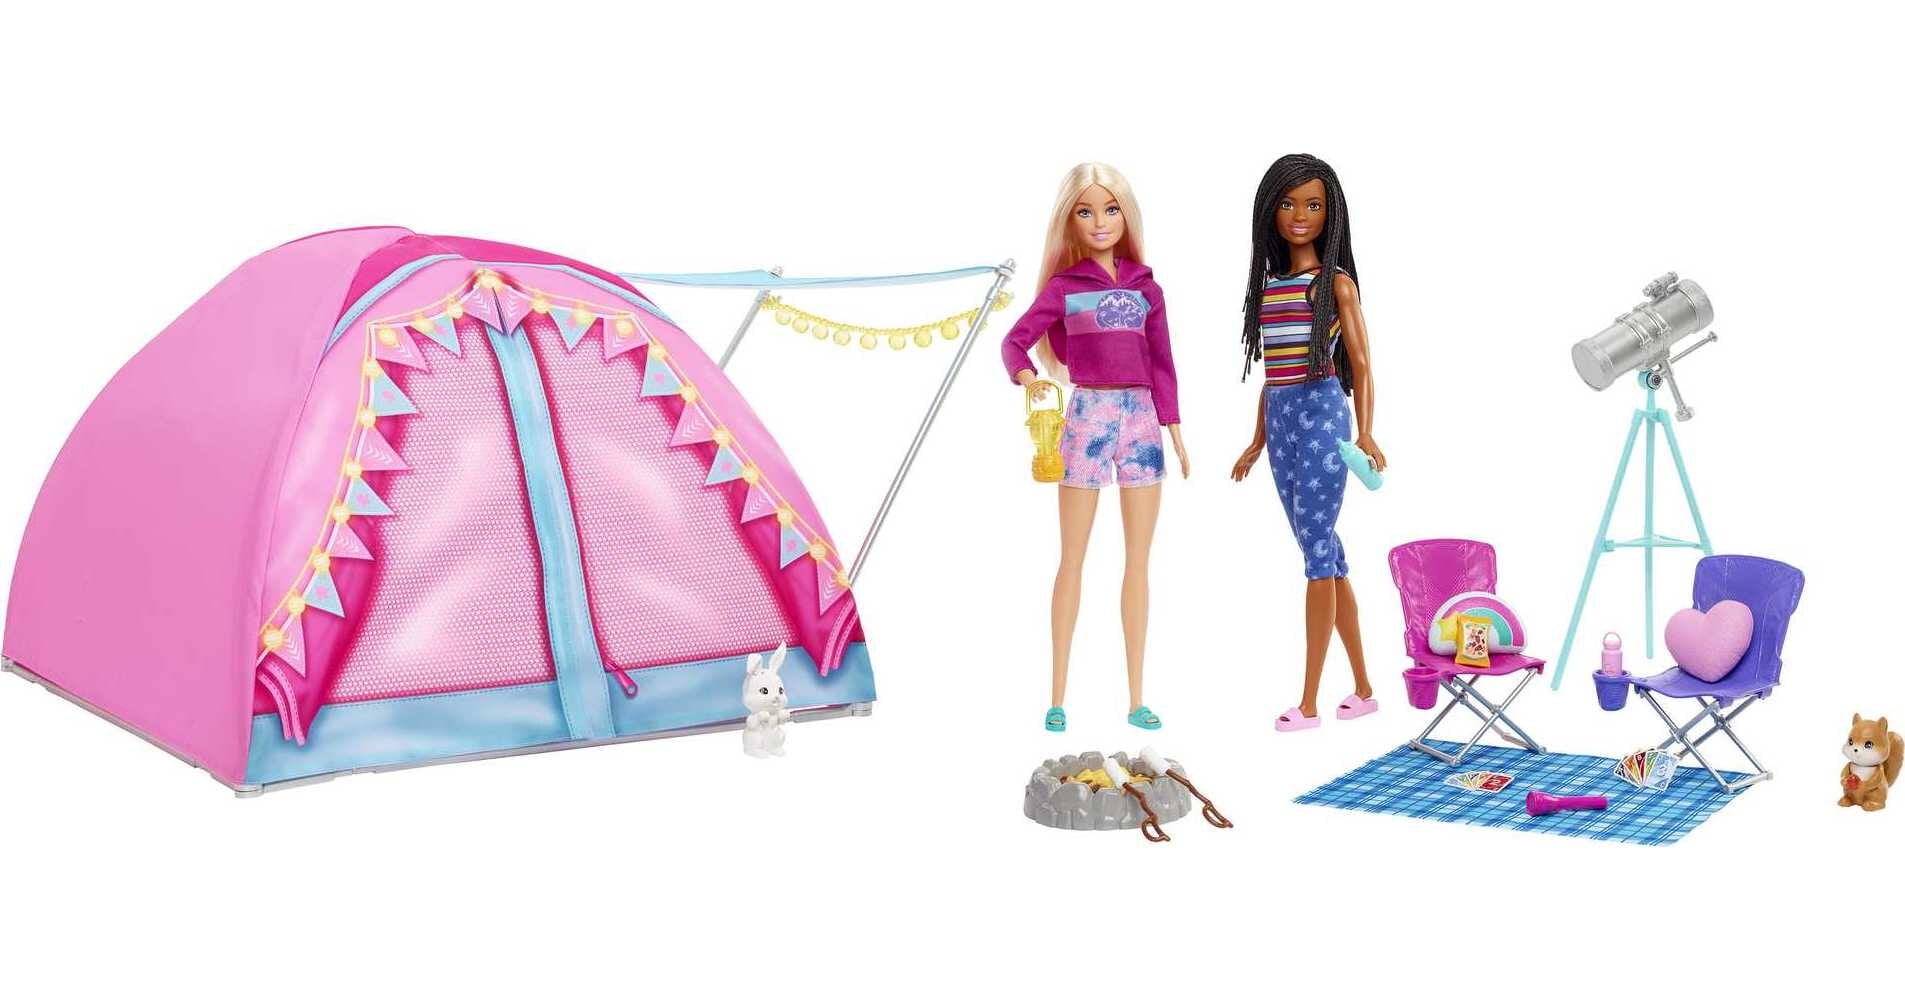 Barbie It Takes Two Camping Playset with Tent, 2 Barbie Dolls & Accessories